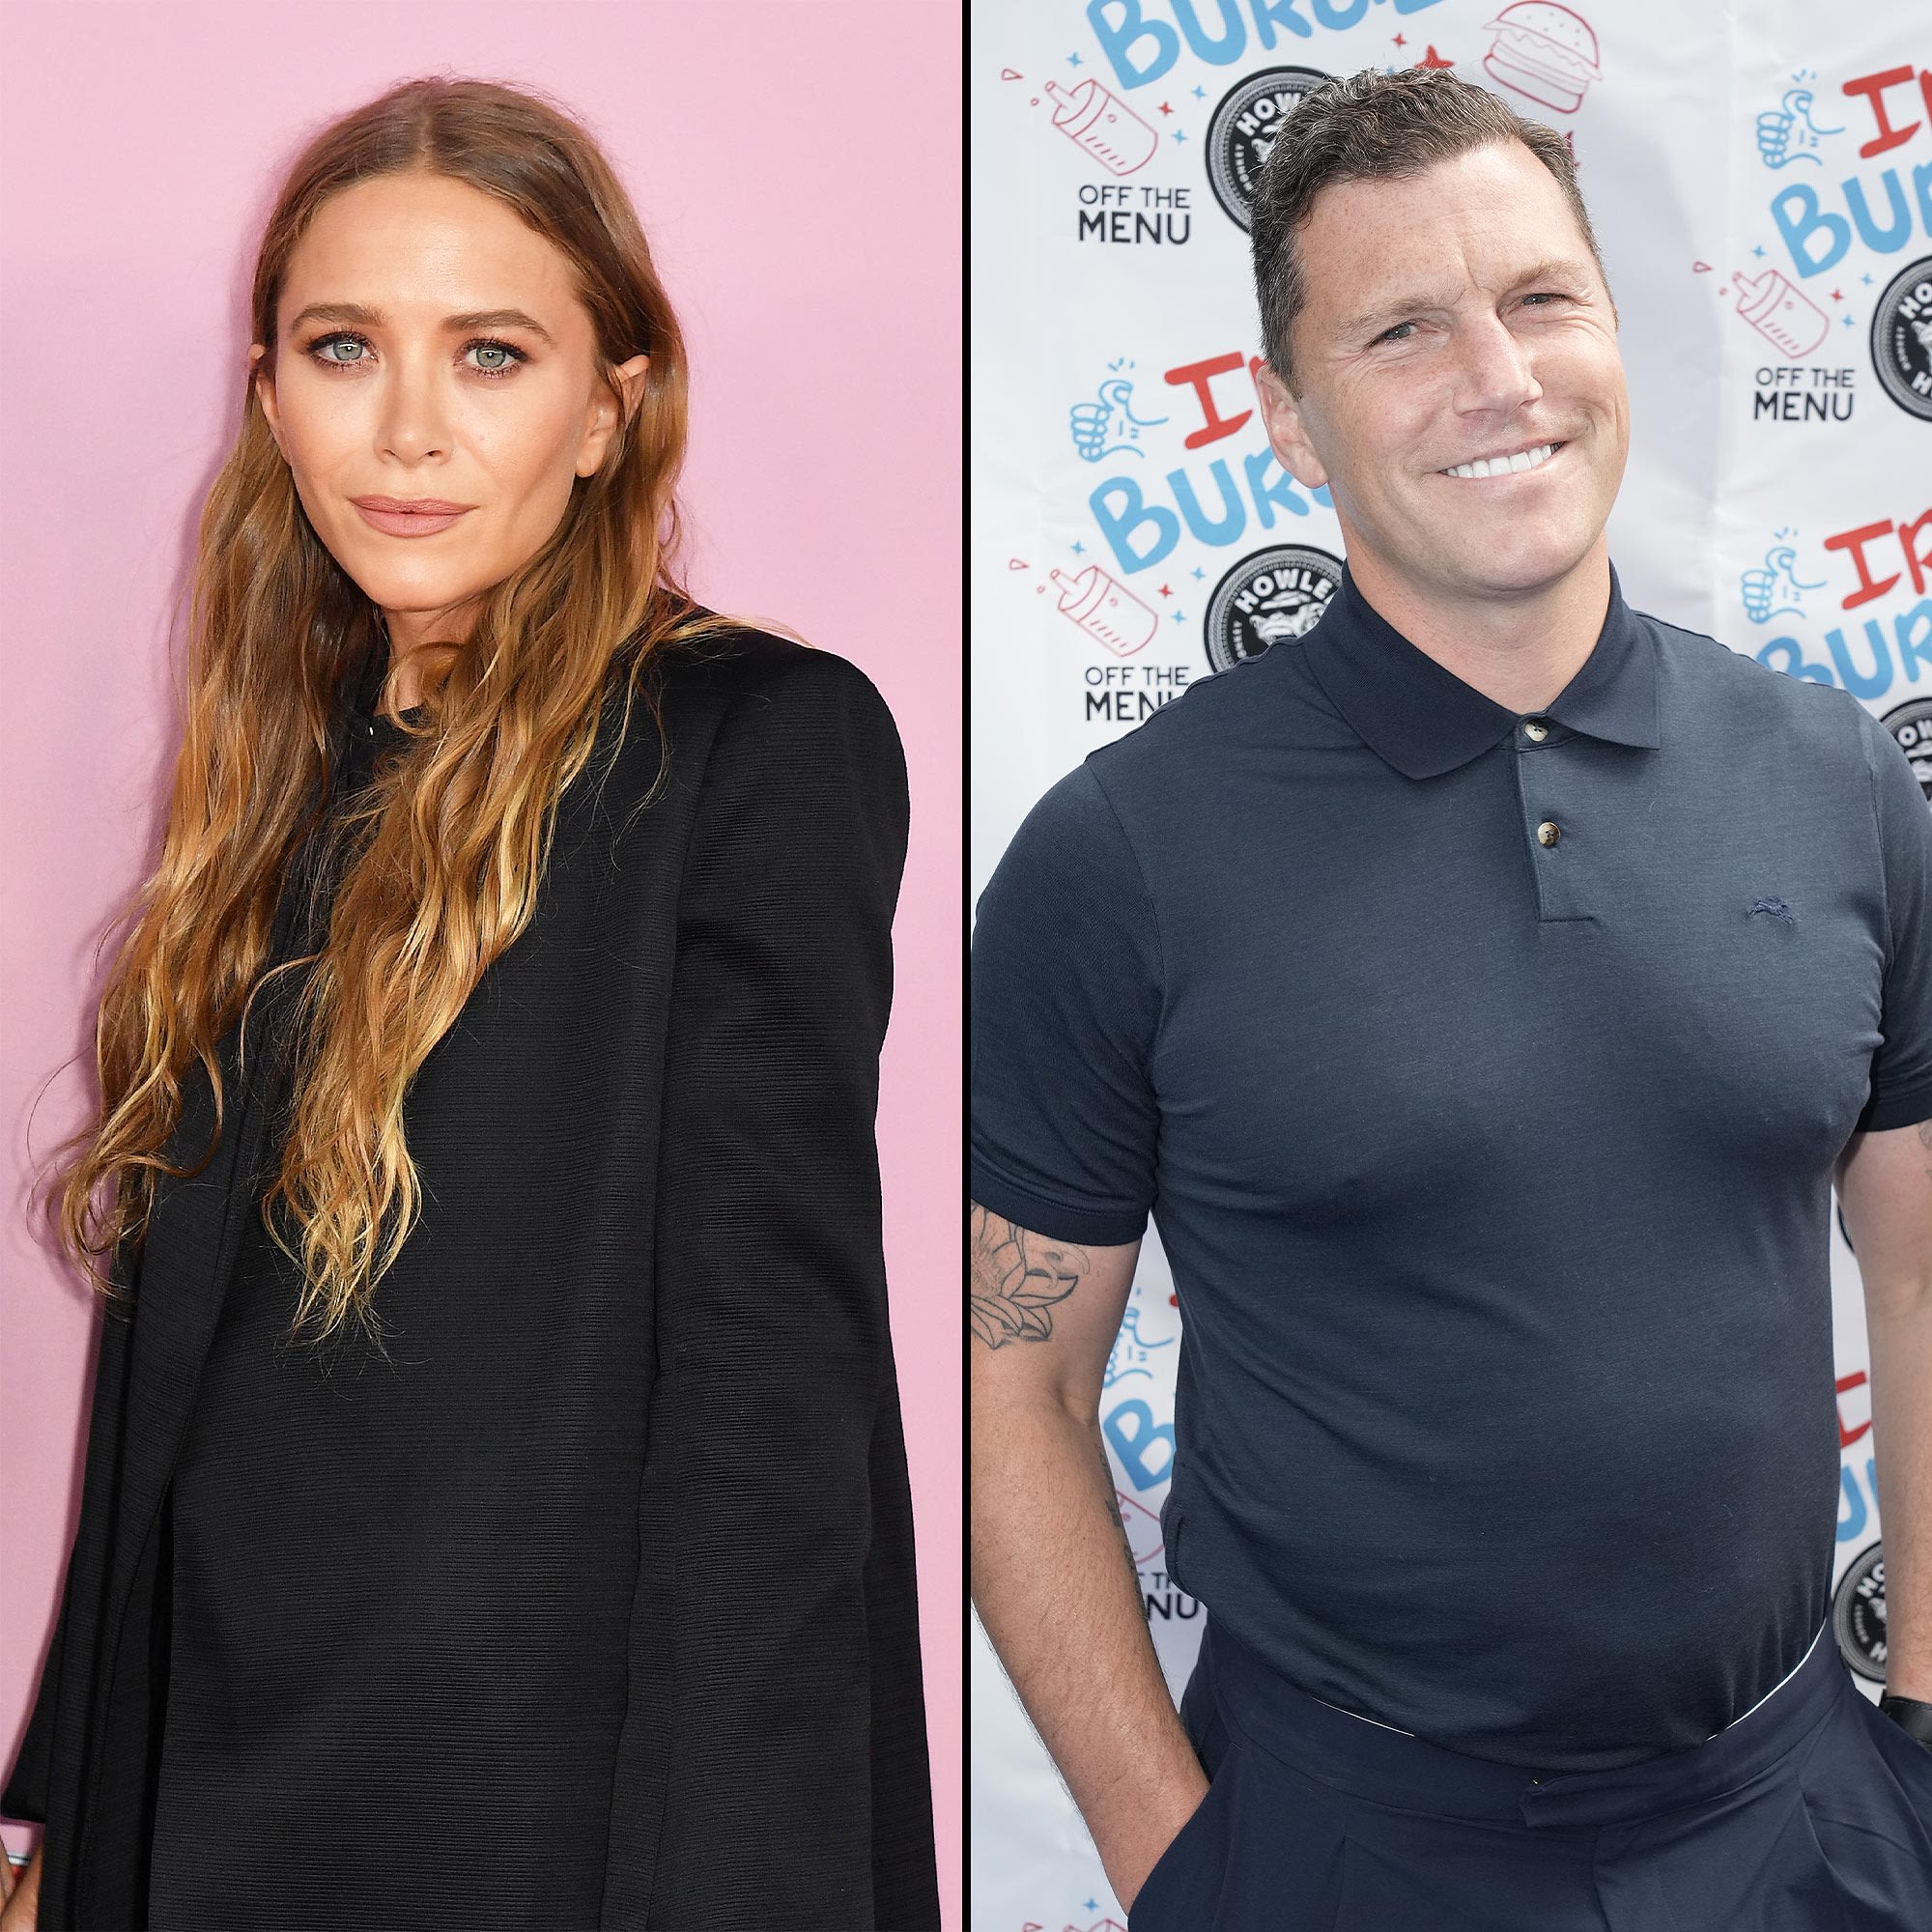 Mary-Kate Olsen Is Not Dating Sean Avery After Sparking Romance Rumors: ‘They’re Just Friends,’ Source Says